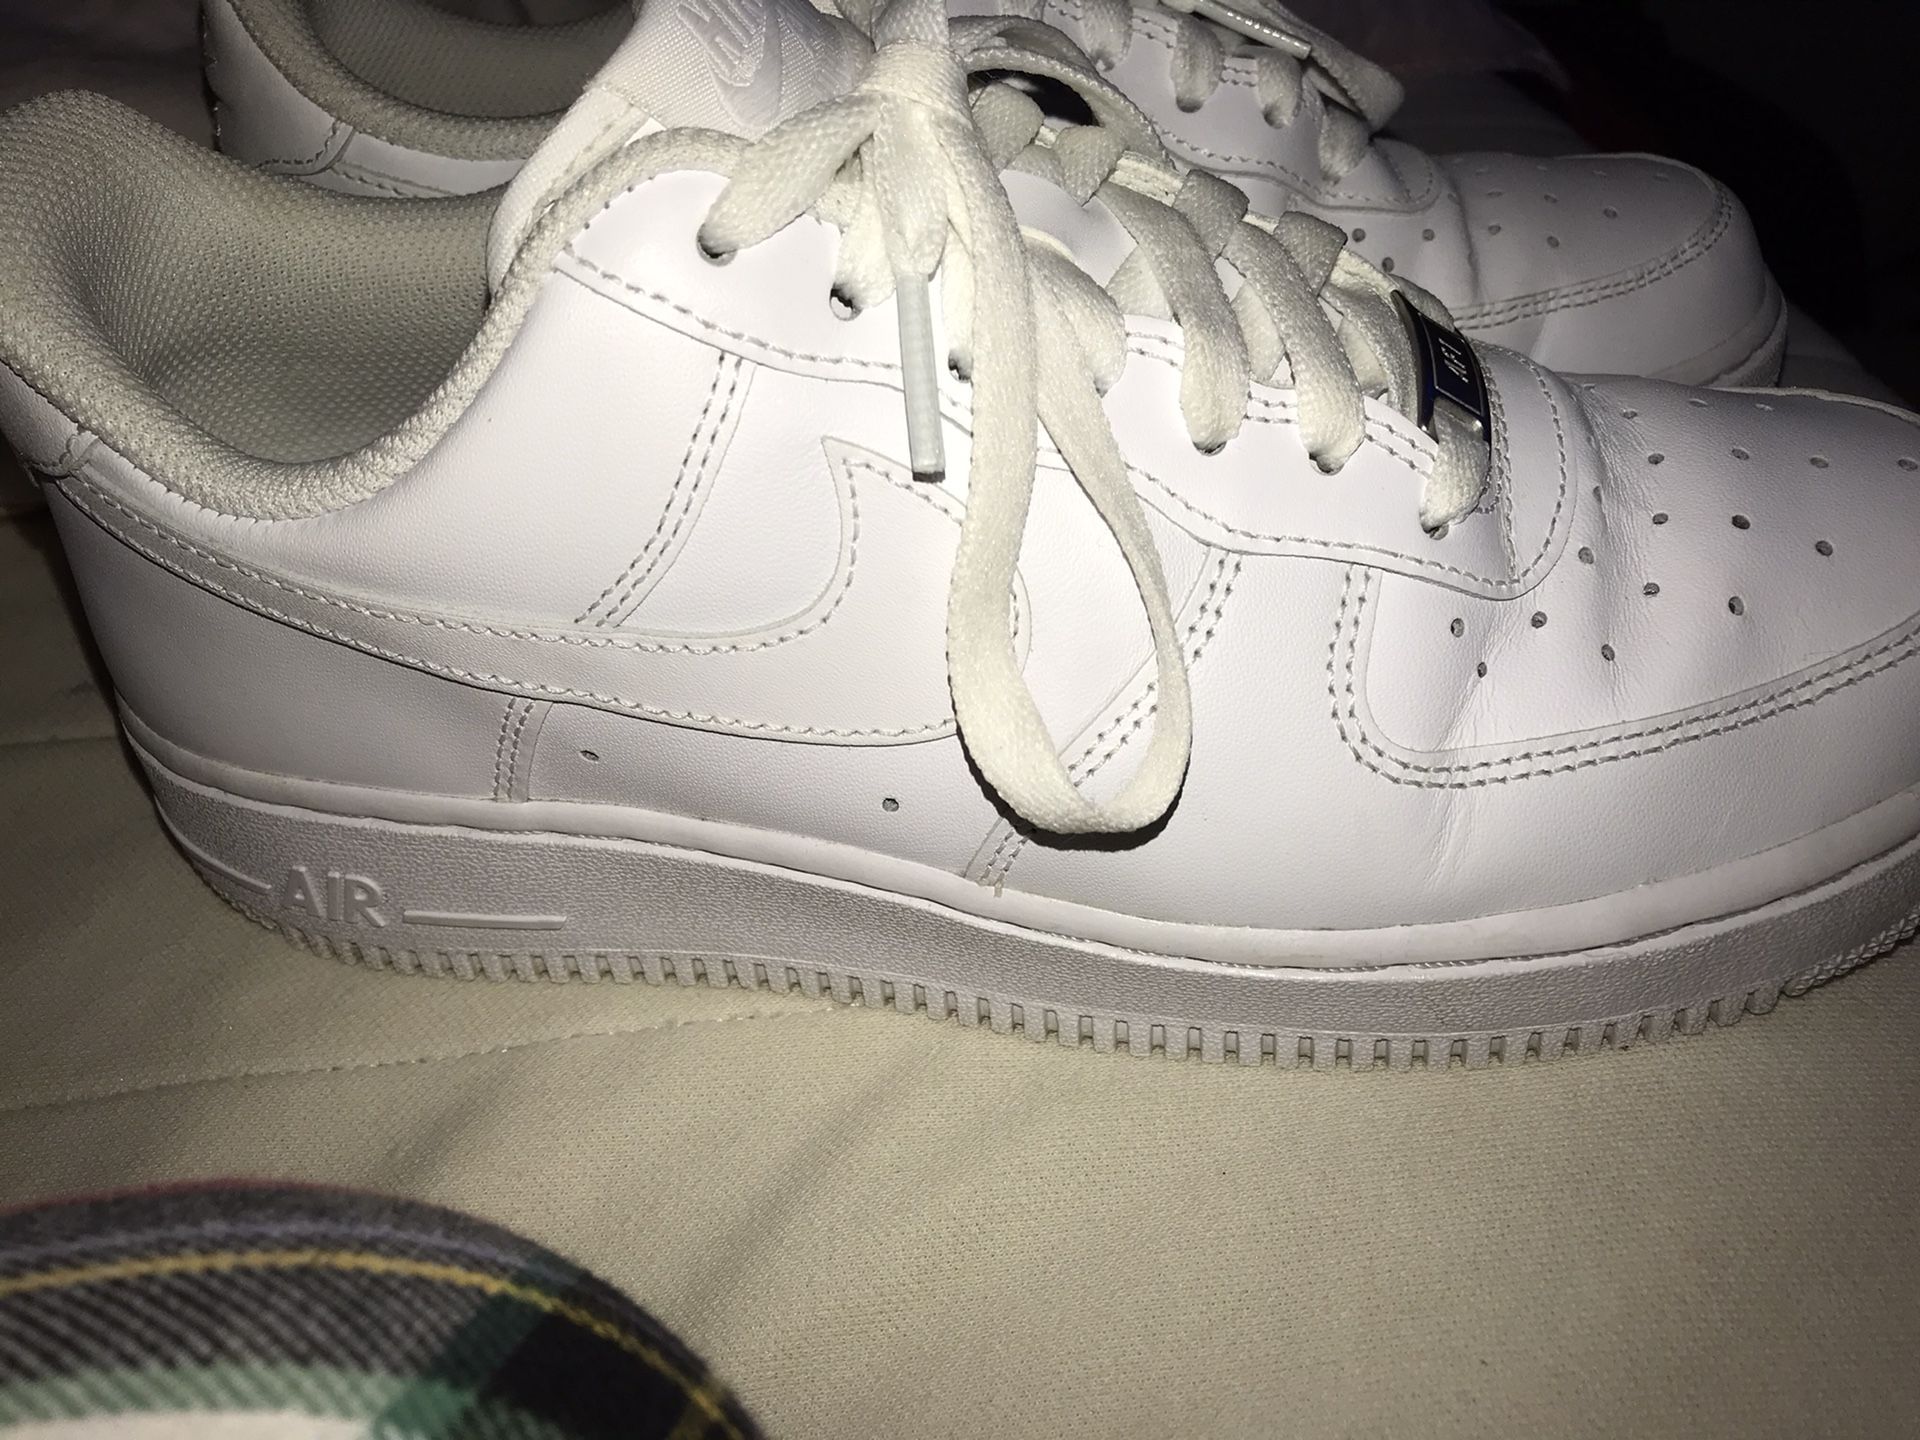 air force 1’s (size 8)